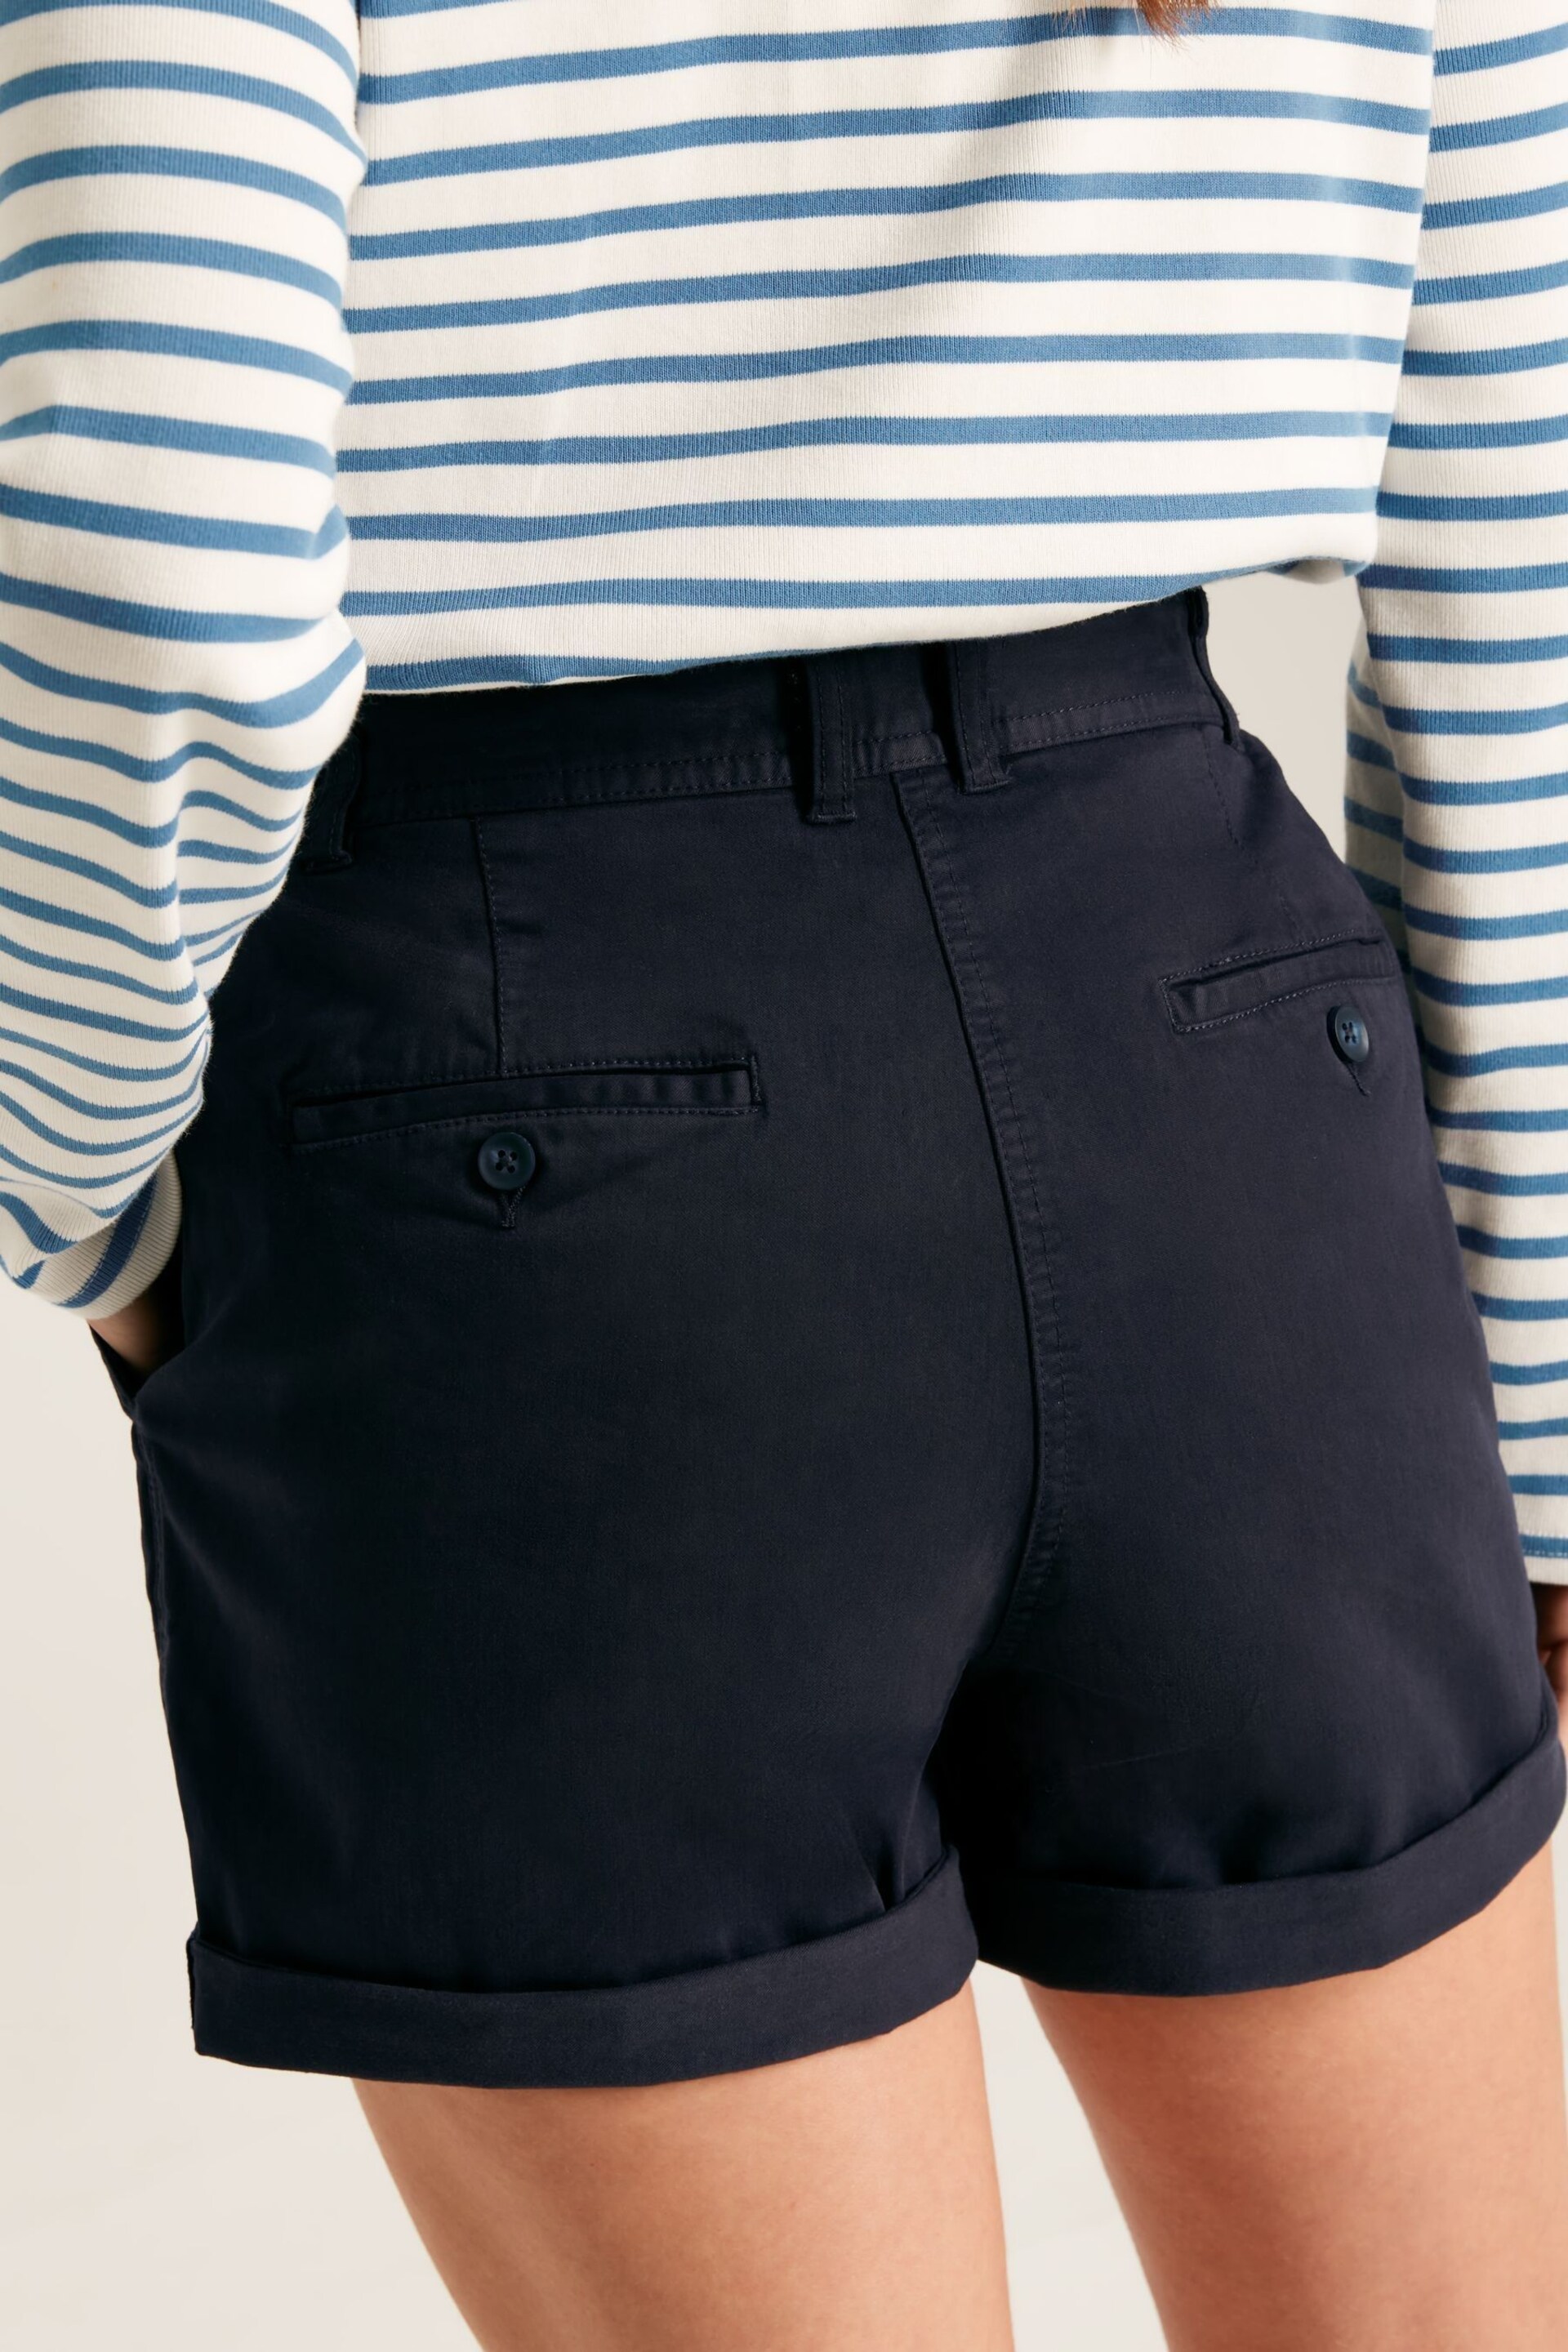 Joules Navy Blue Chino Shorts - Image 2 of 5